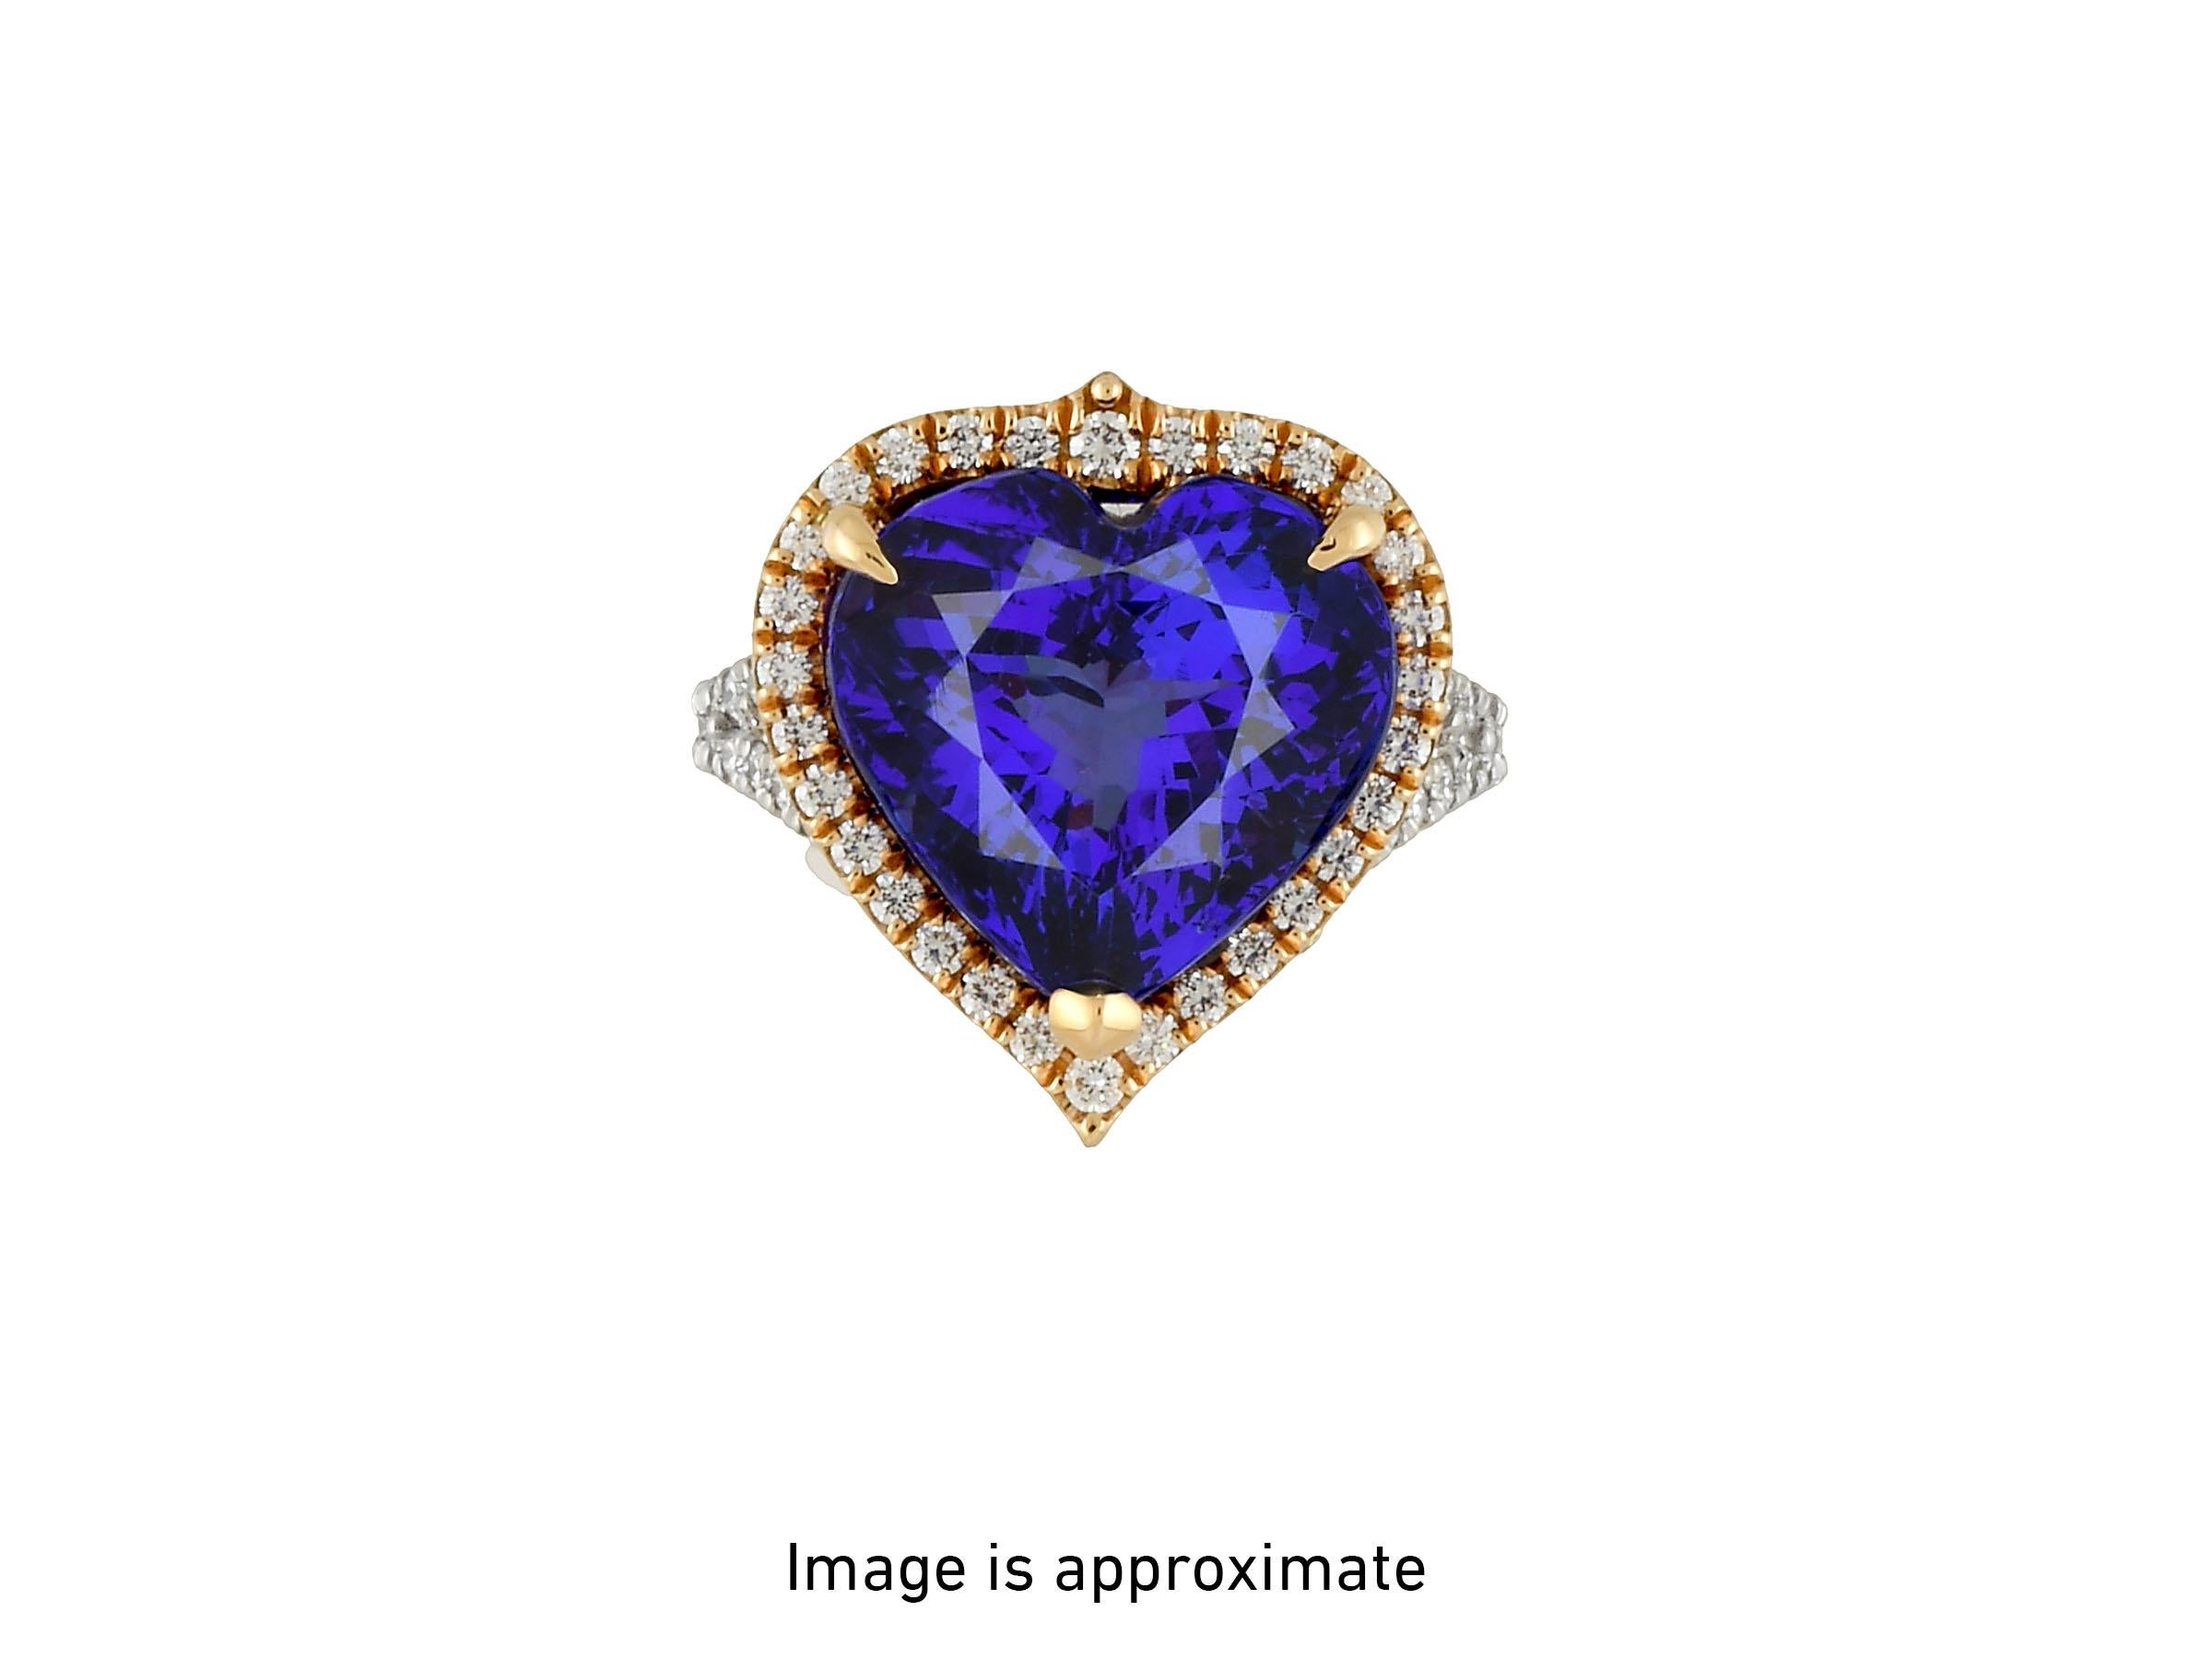 Modern 7.31ct heart-shaped Tanzanite ring. GIA certified. For Sale